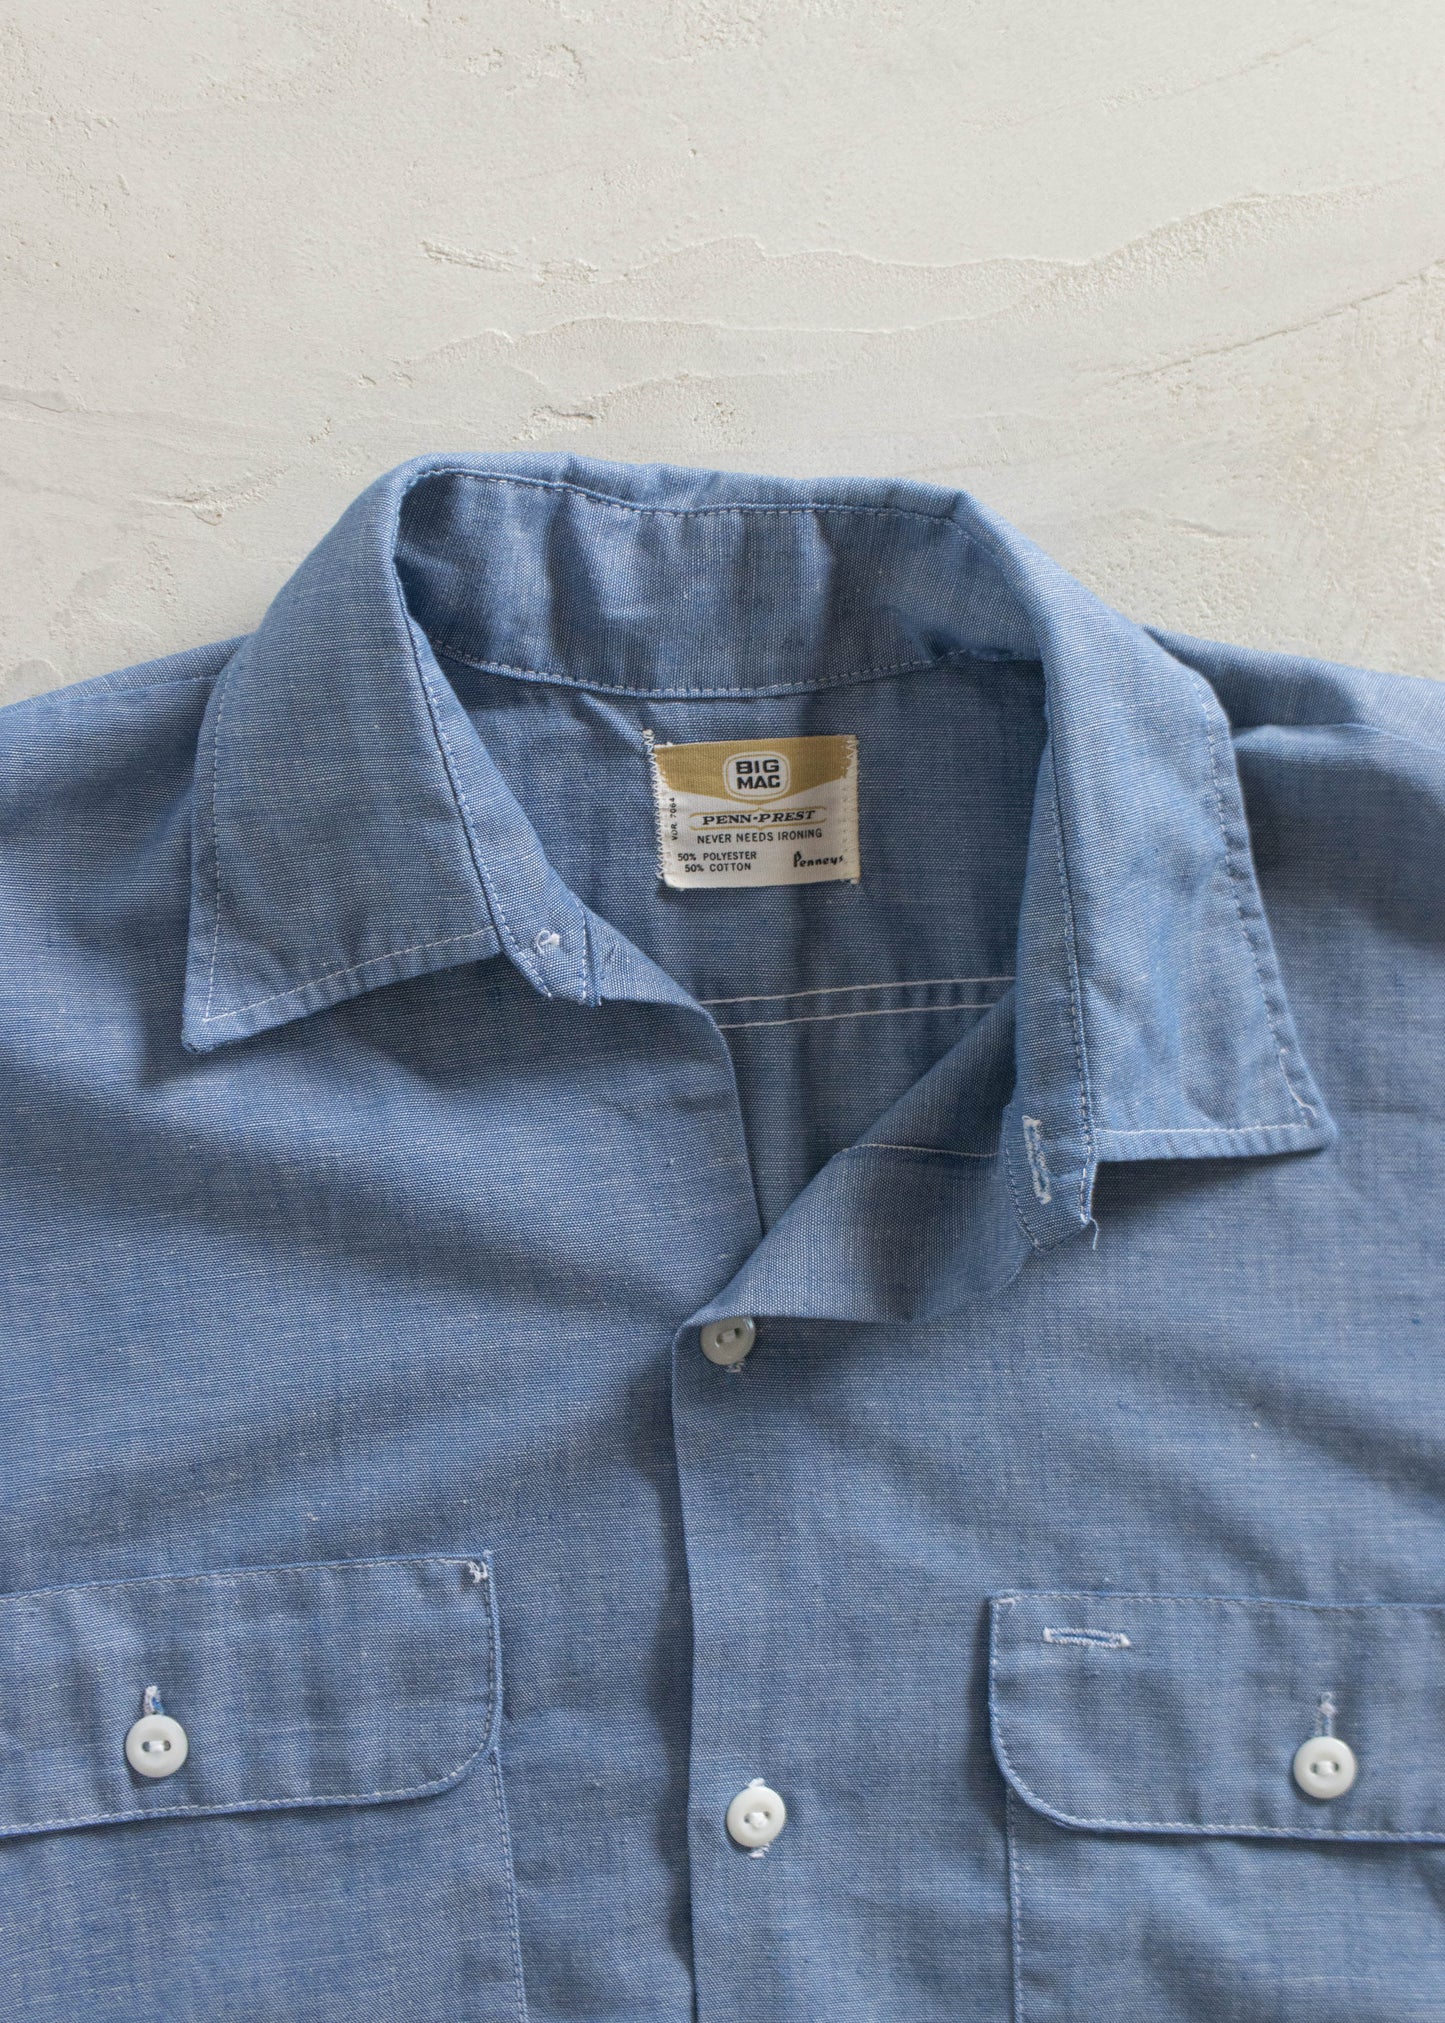 Vintage 1970s Big Mac by JC Penney Chambray Button Up Shirt Size XS/S